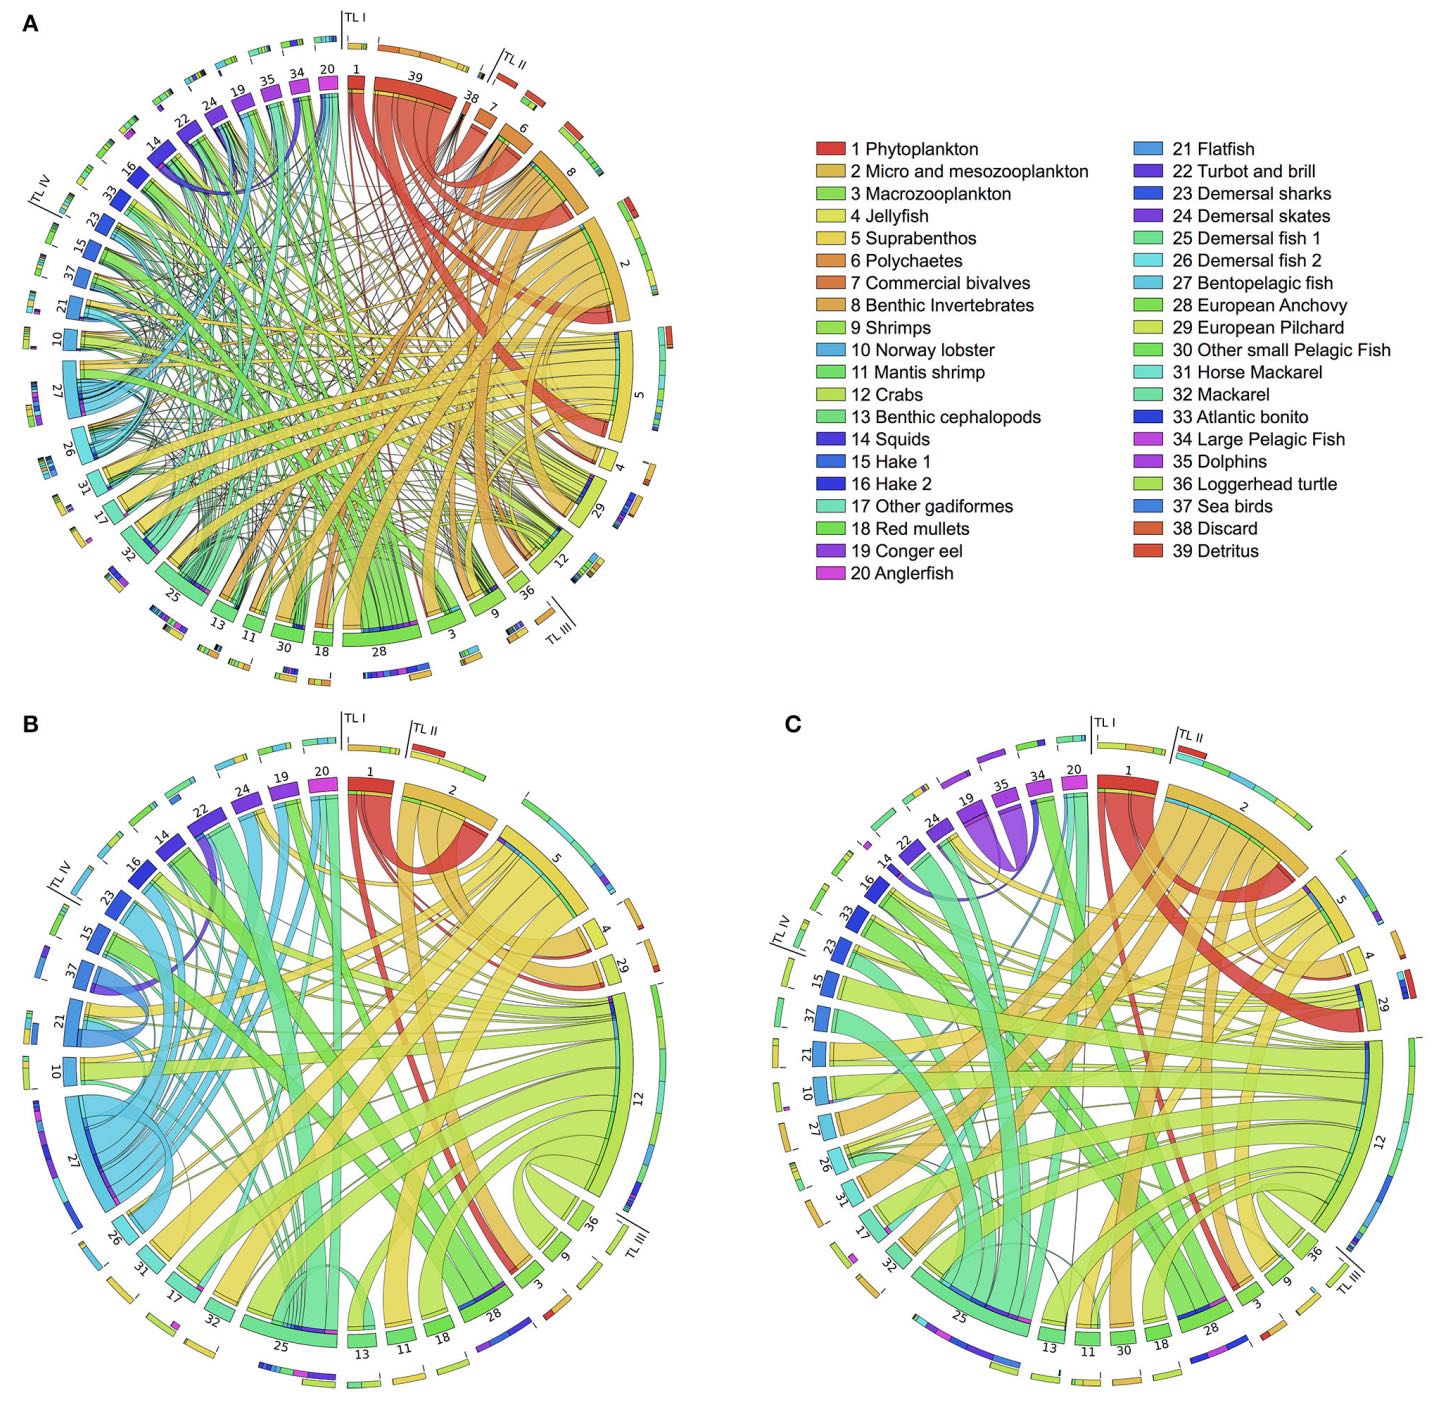 Network analysis for bioaccumulation and bioremediation in contaminated food webs